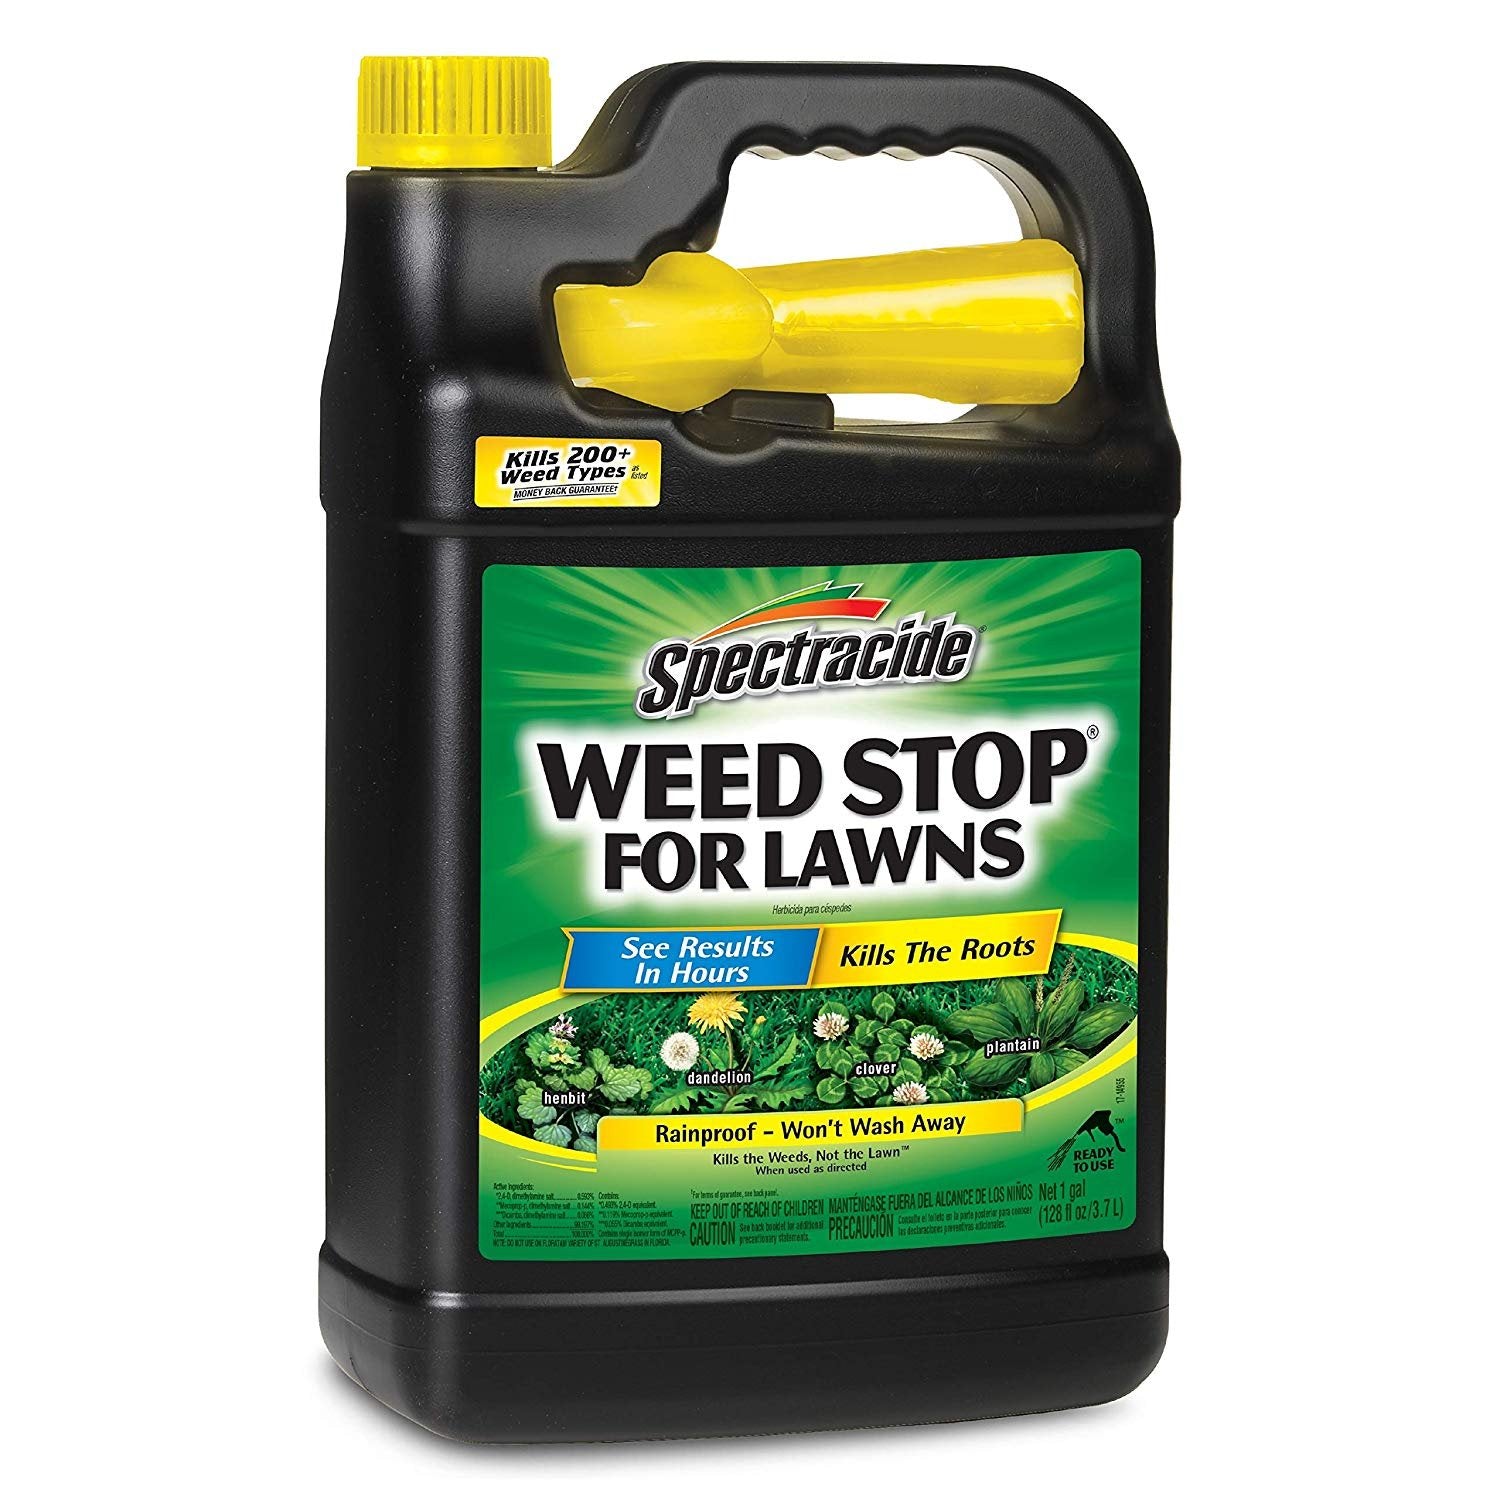 Spectracide 95833 Weed Stop For Lawns, 1